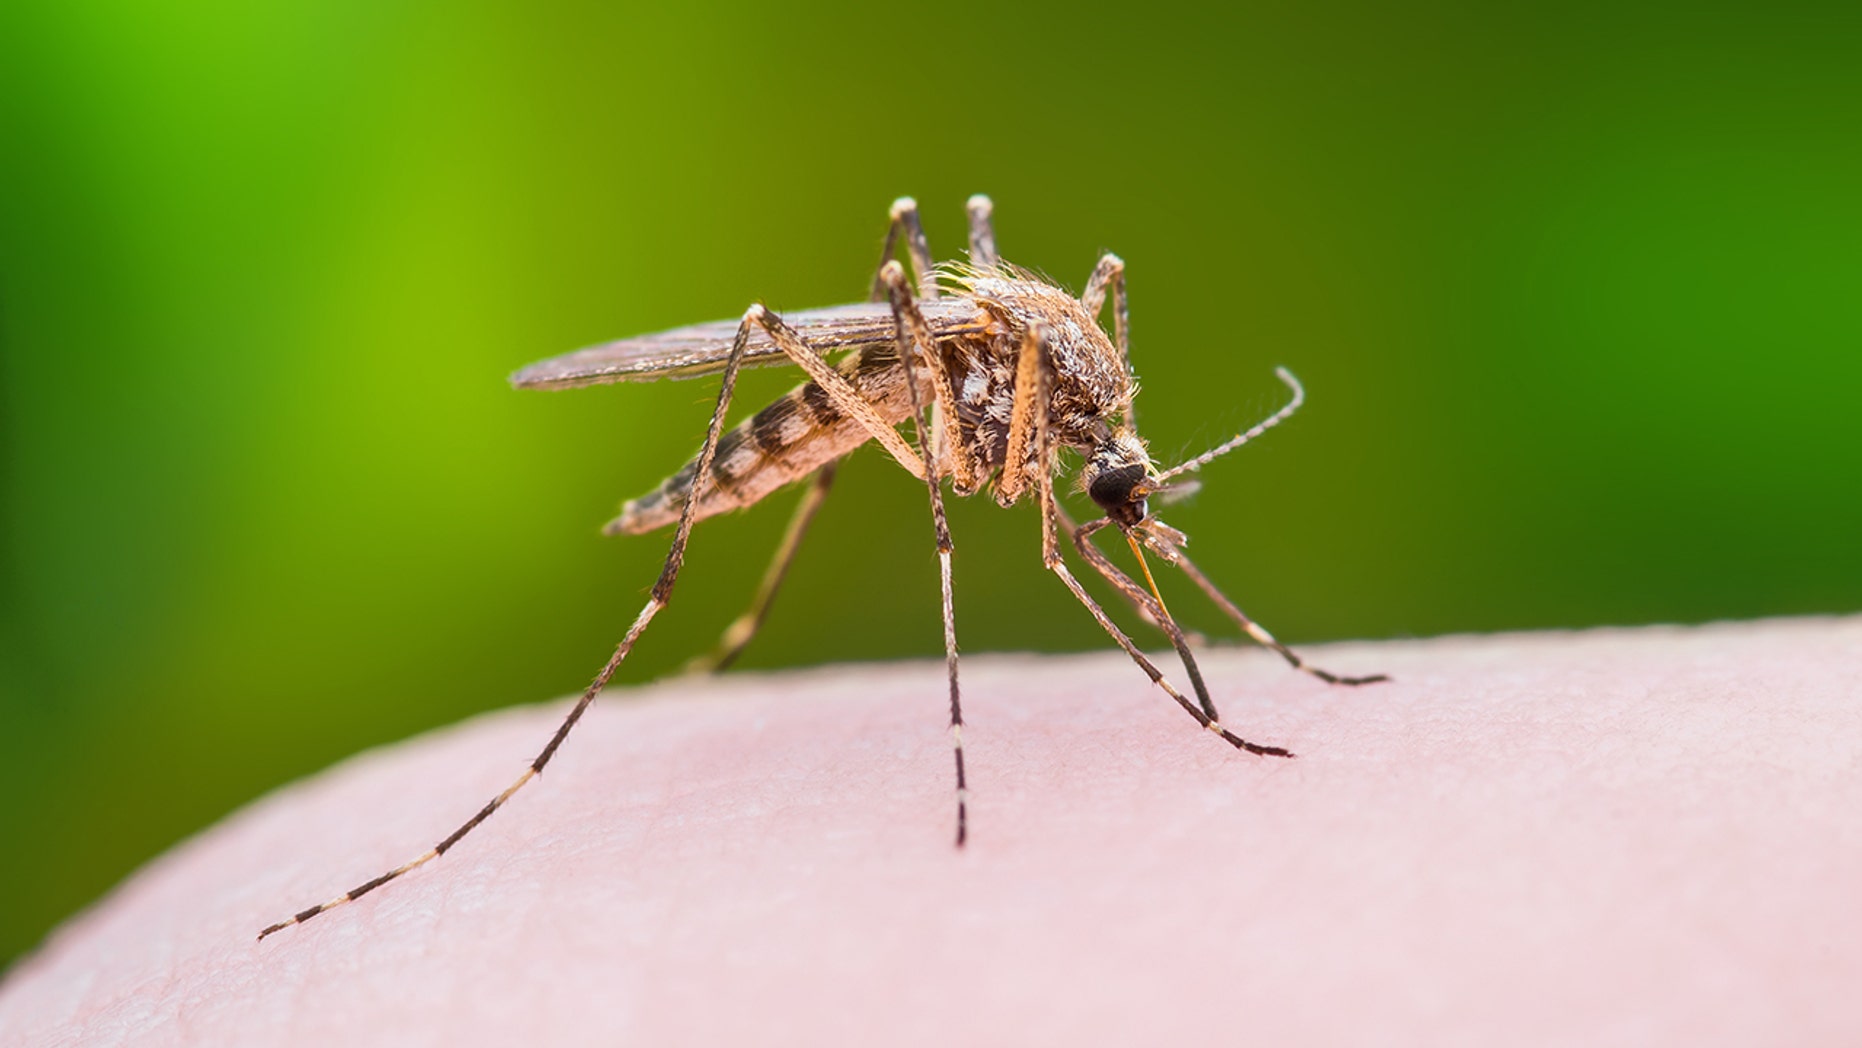 Mosquitoes can spread West Nile virus.